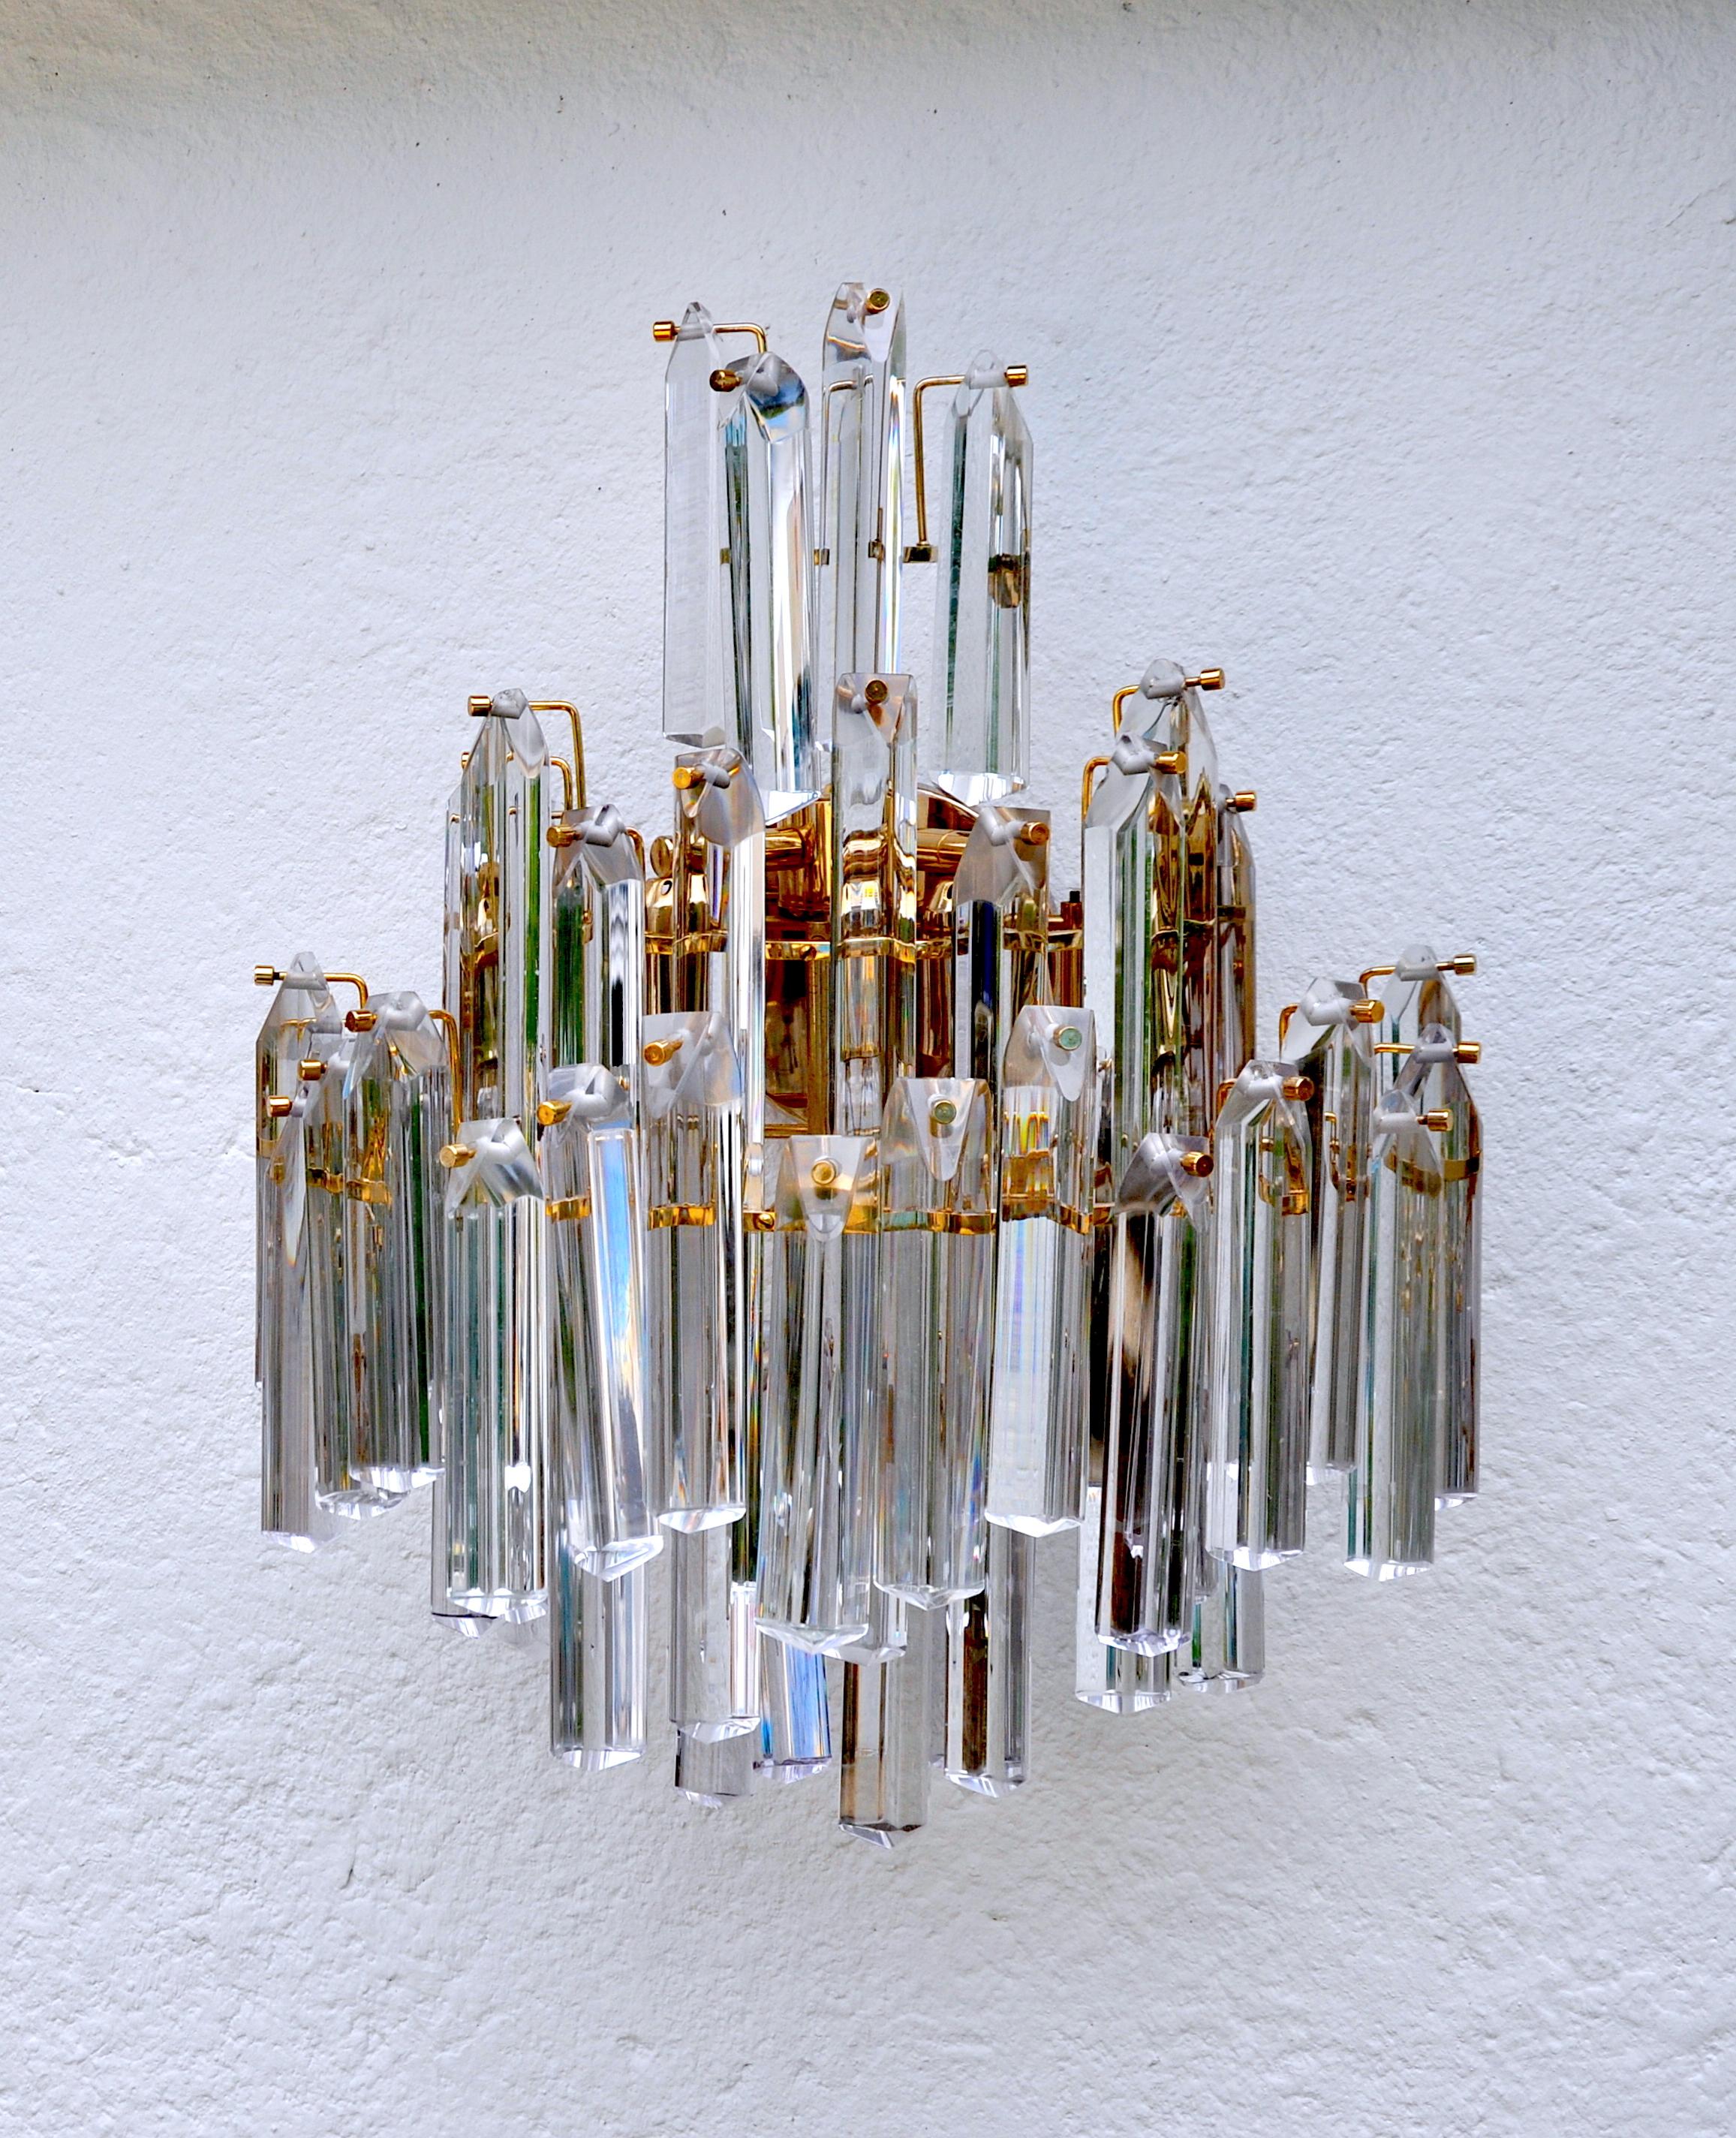 Superb and rare Venini sconce with 4 tiers dating from the 70s. Murano glass and gilded metal structure. Unique object that will illuminate and bring a real design touch to your interior. Verified electricity, time mark relative to the age of the